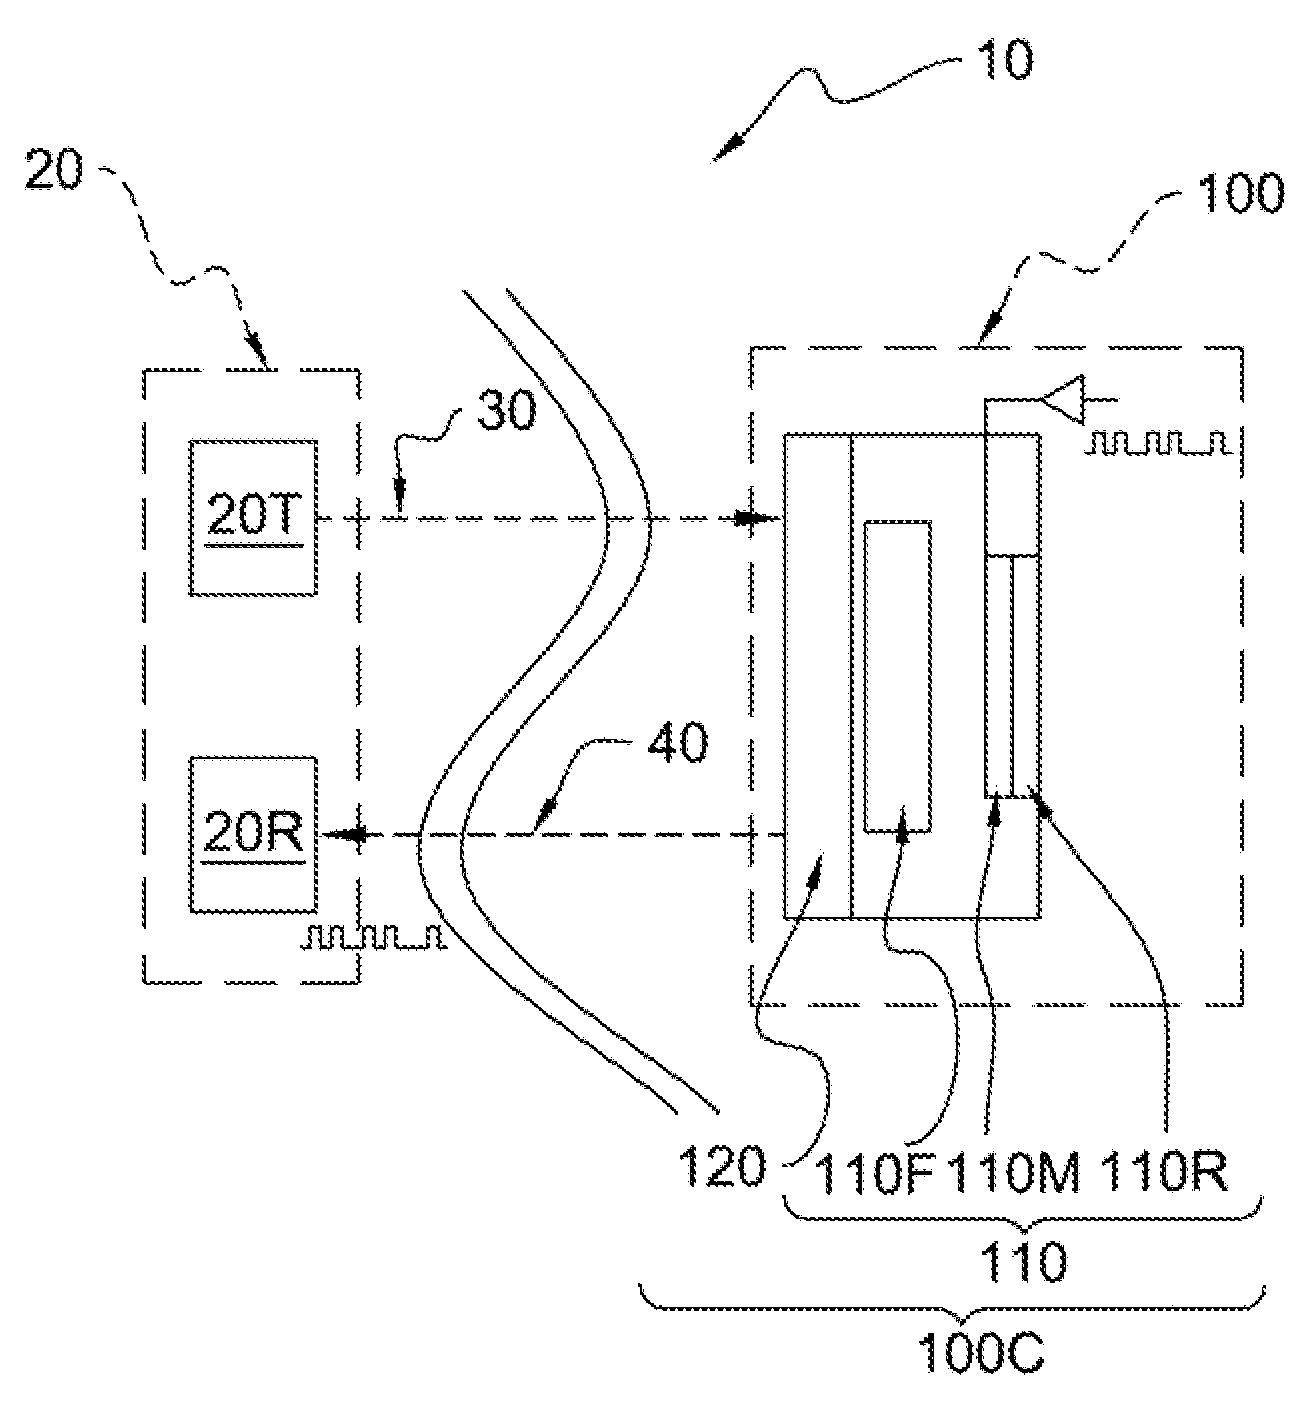 Optical communication system with cats-eye modulating retro-reflector (MRR) assembly, the cats-eye mrr assembly thereof, and the method of optical communication